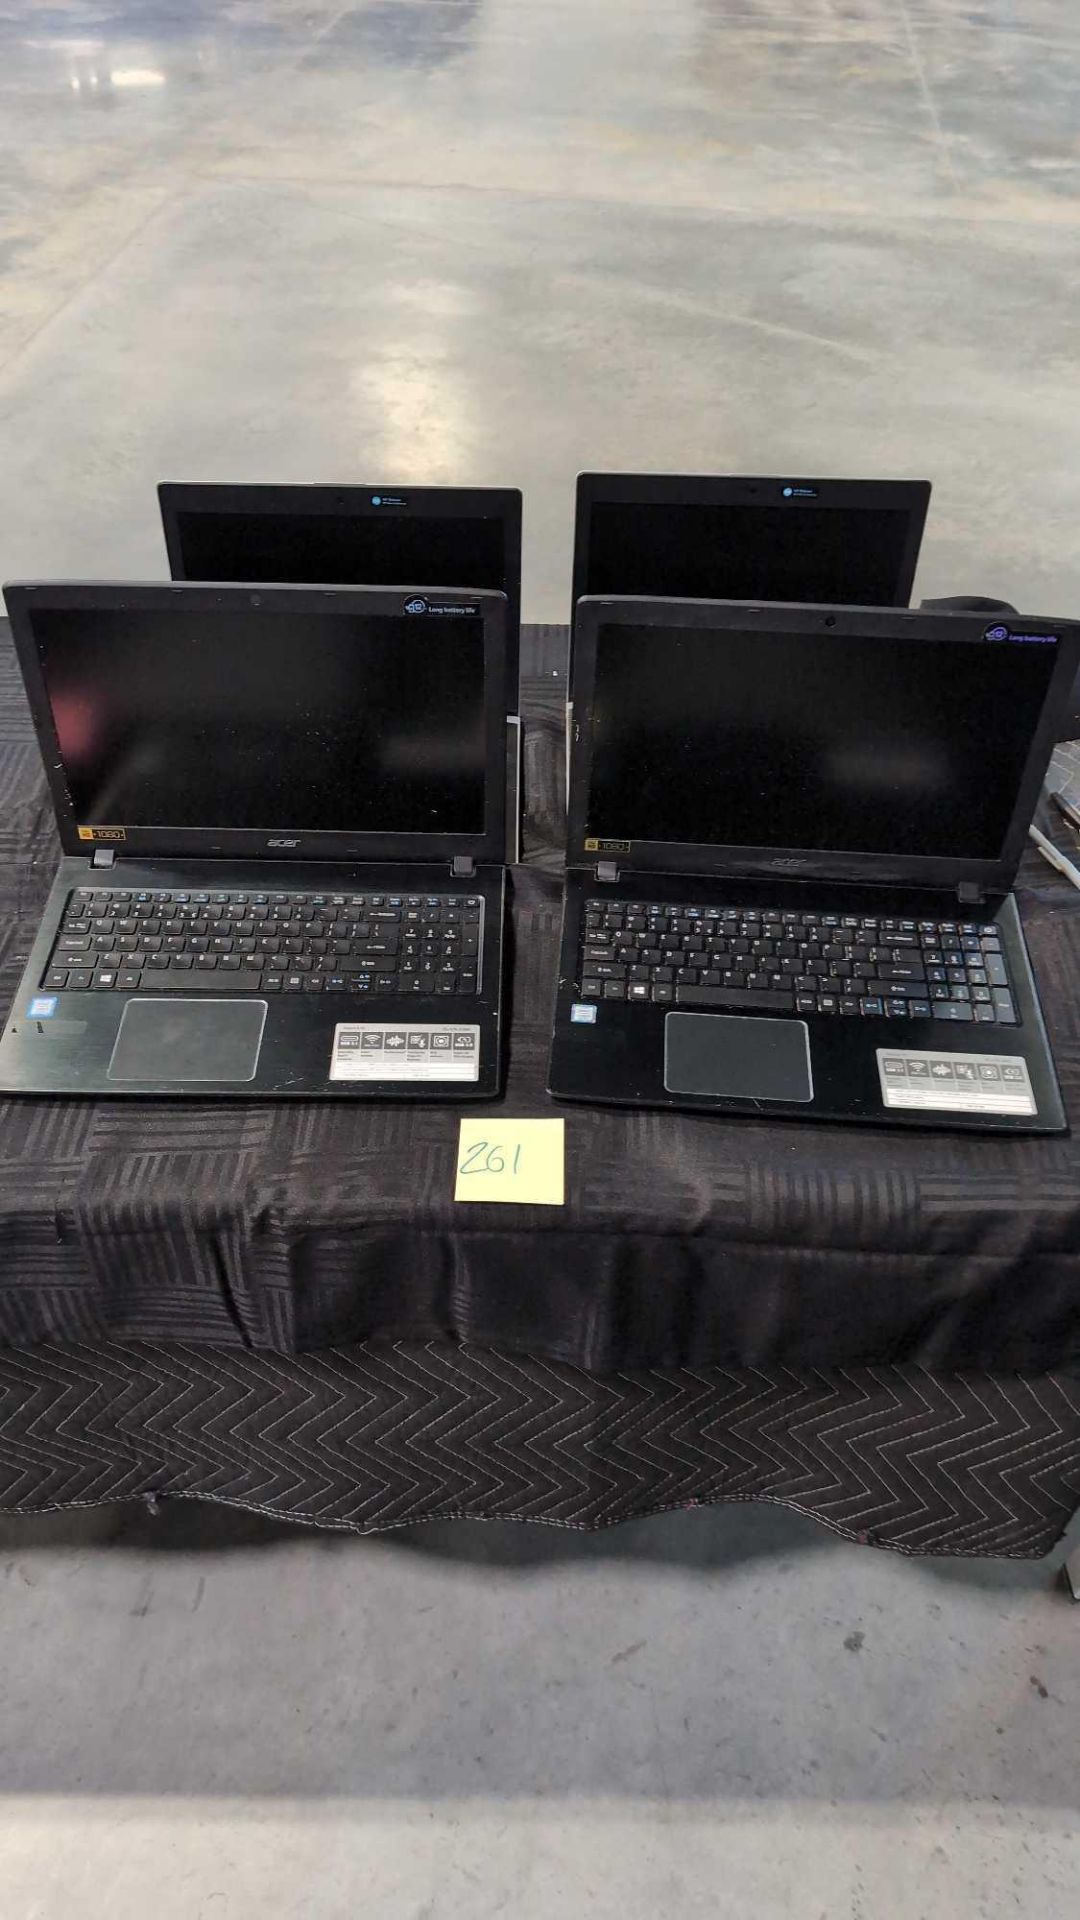 four laptops, two HP and two Acer